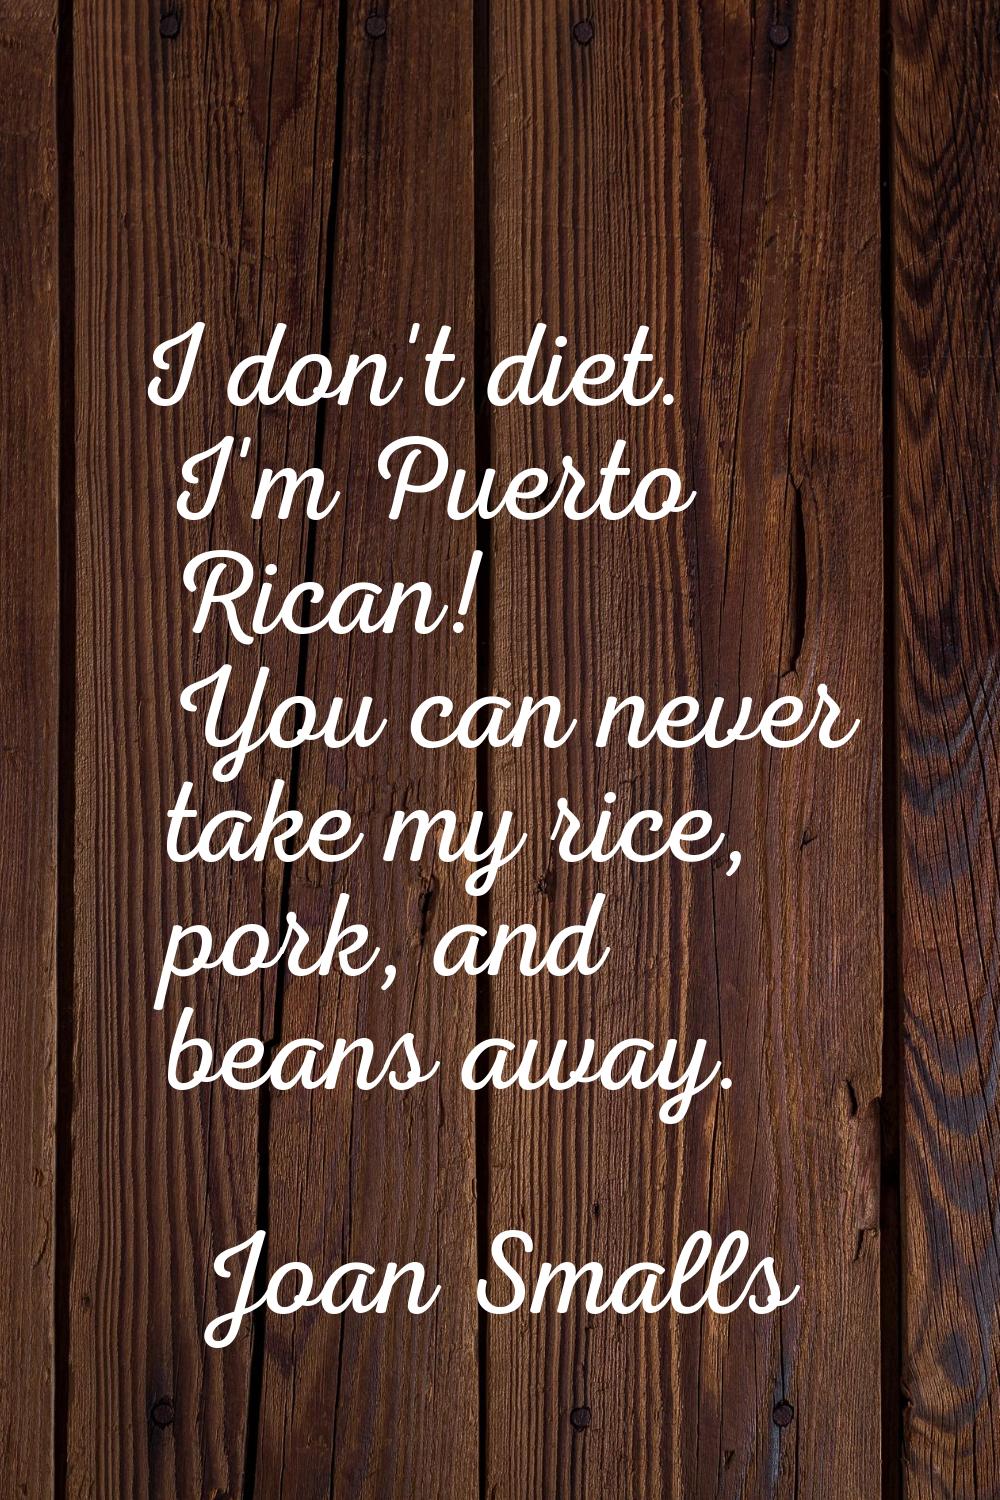 I don't diet. I'm Puerto Rican! You can never take my rice, pork, and beans away.